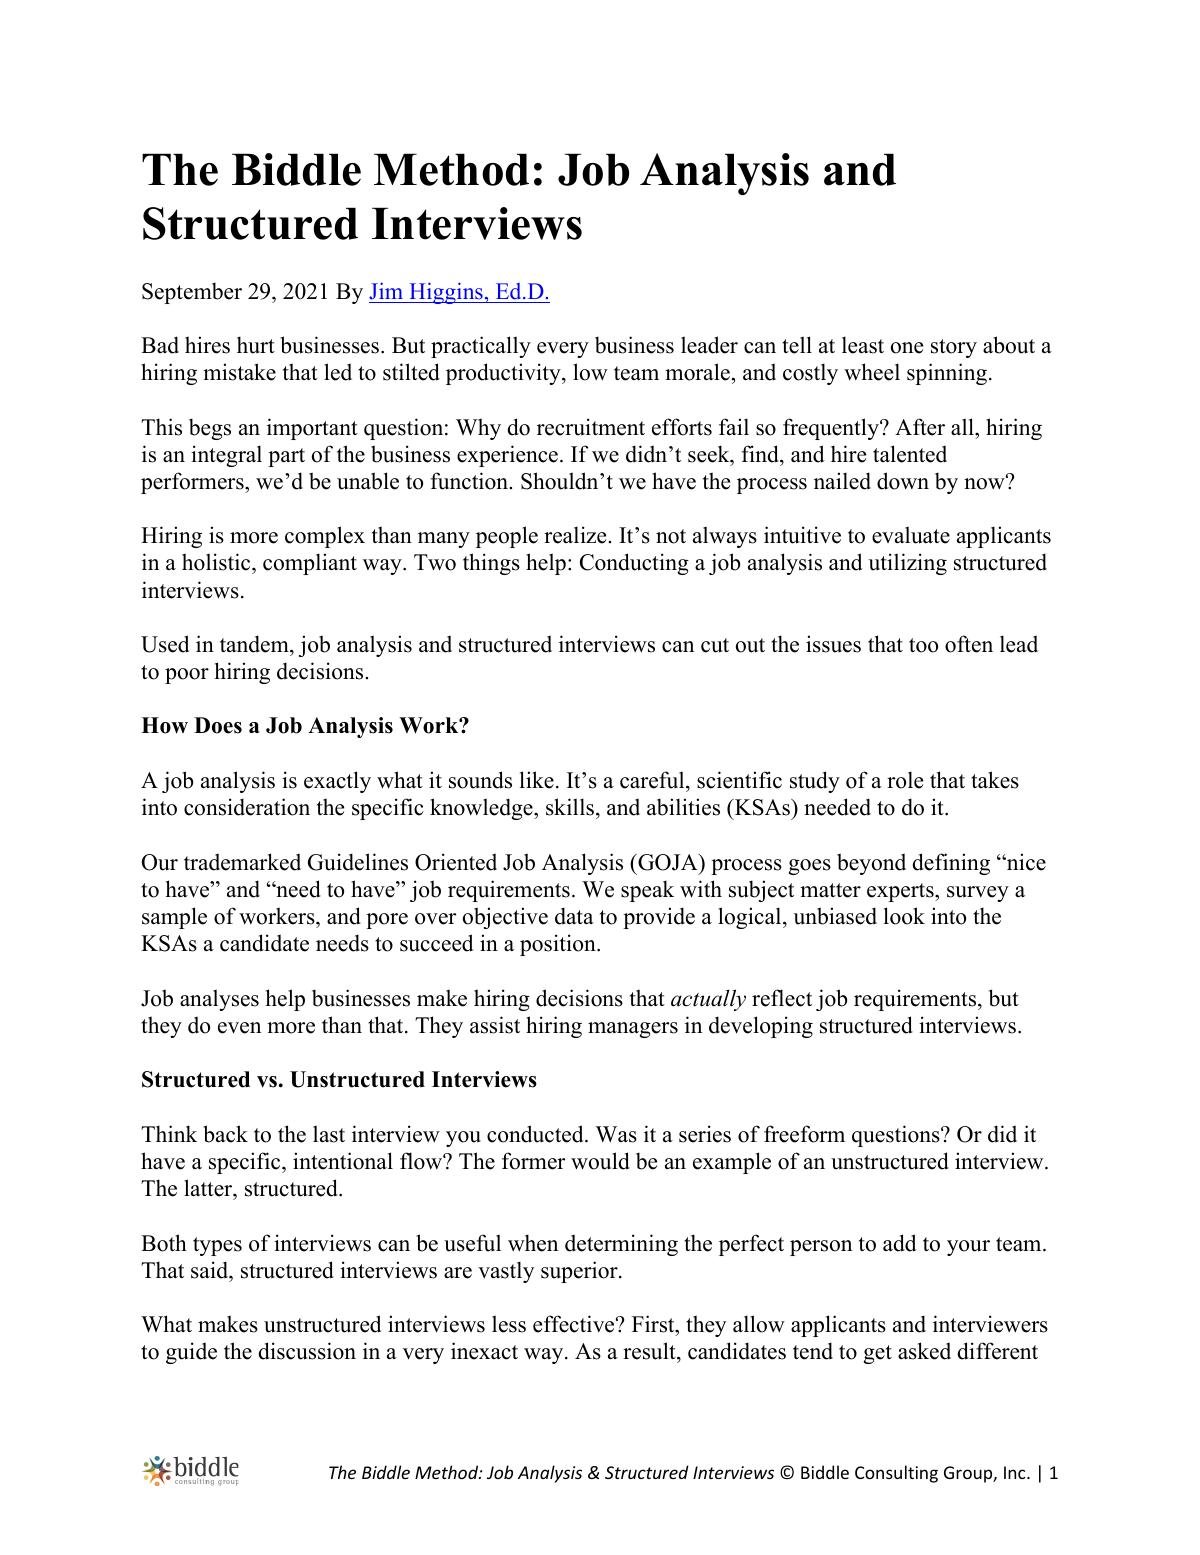 Methodology: Job Analysis and Structured Interviews